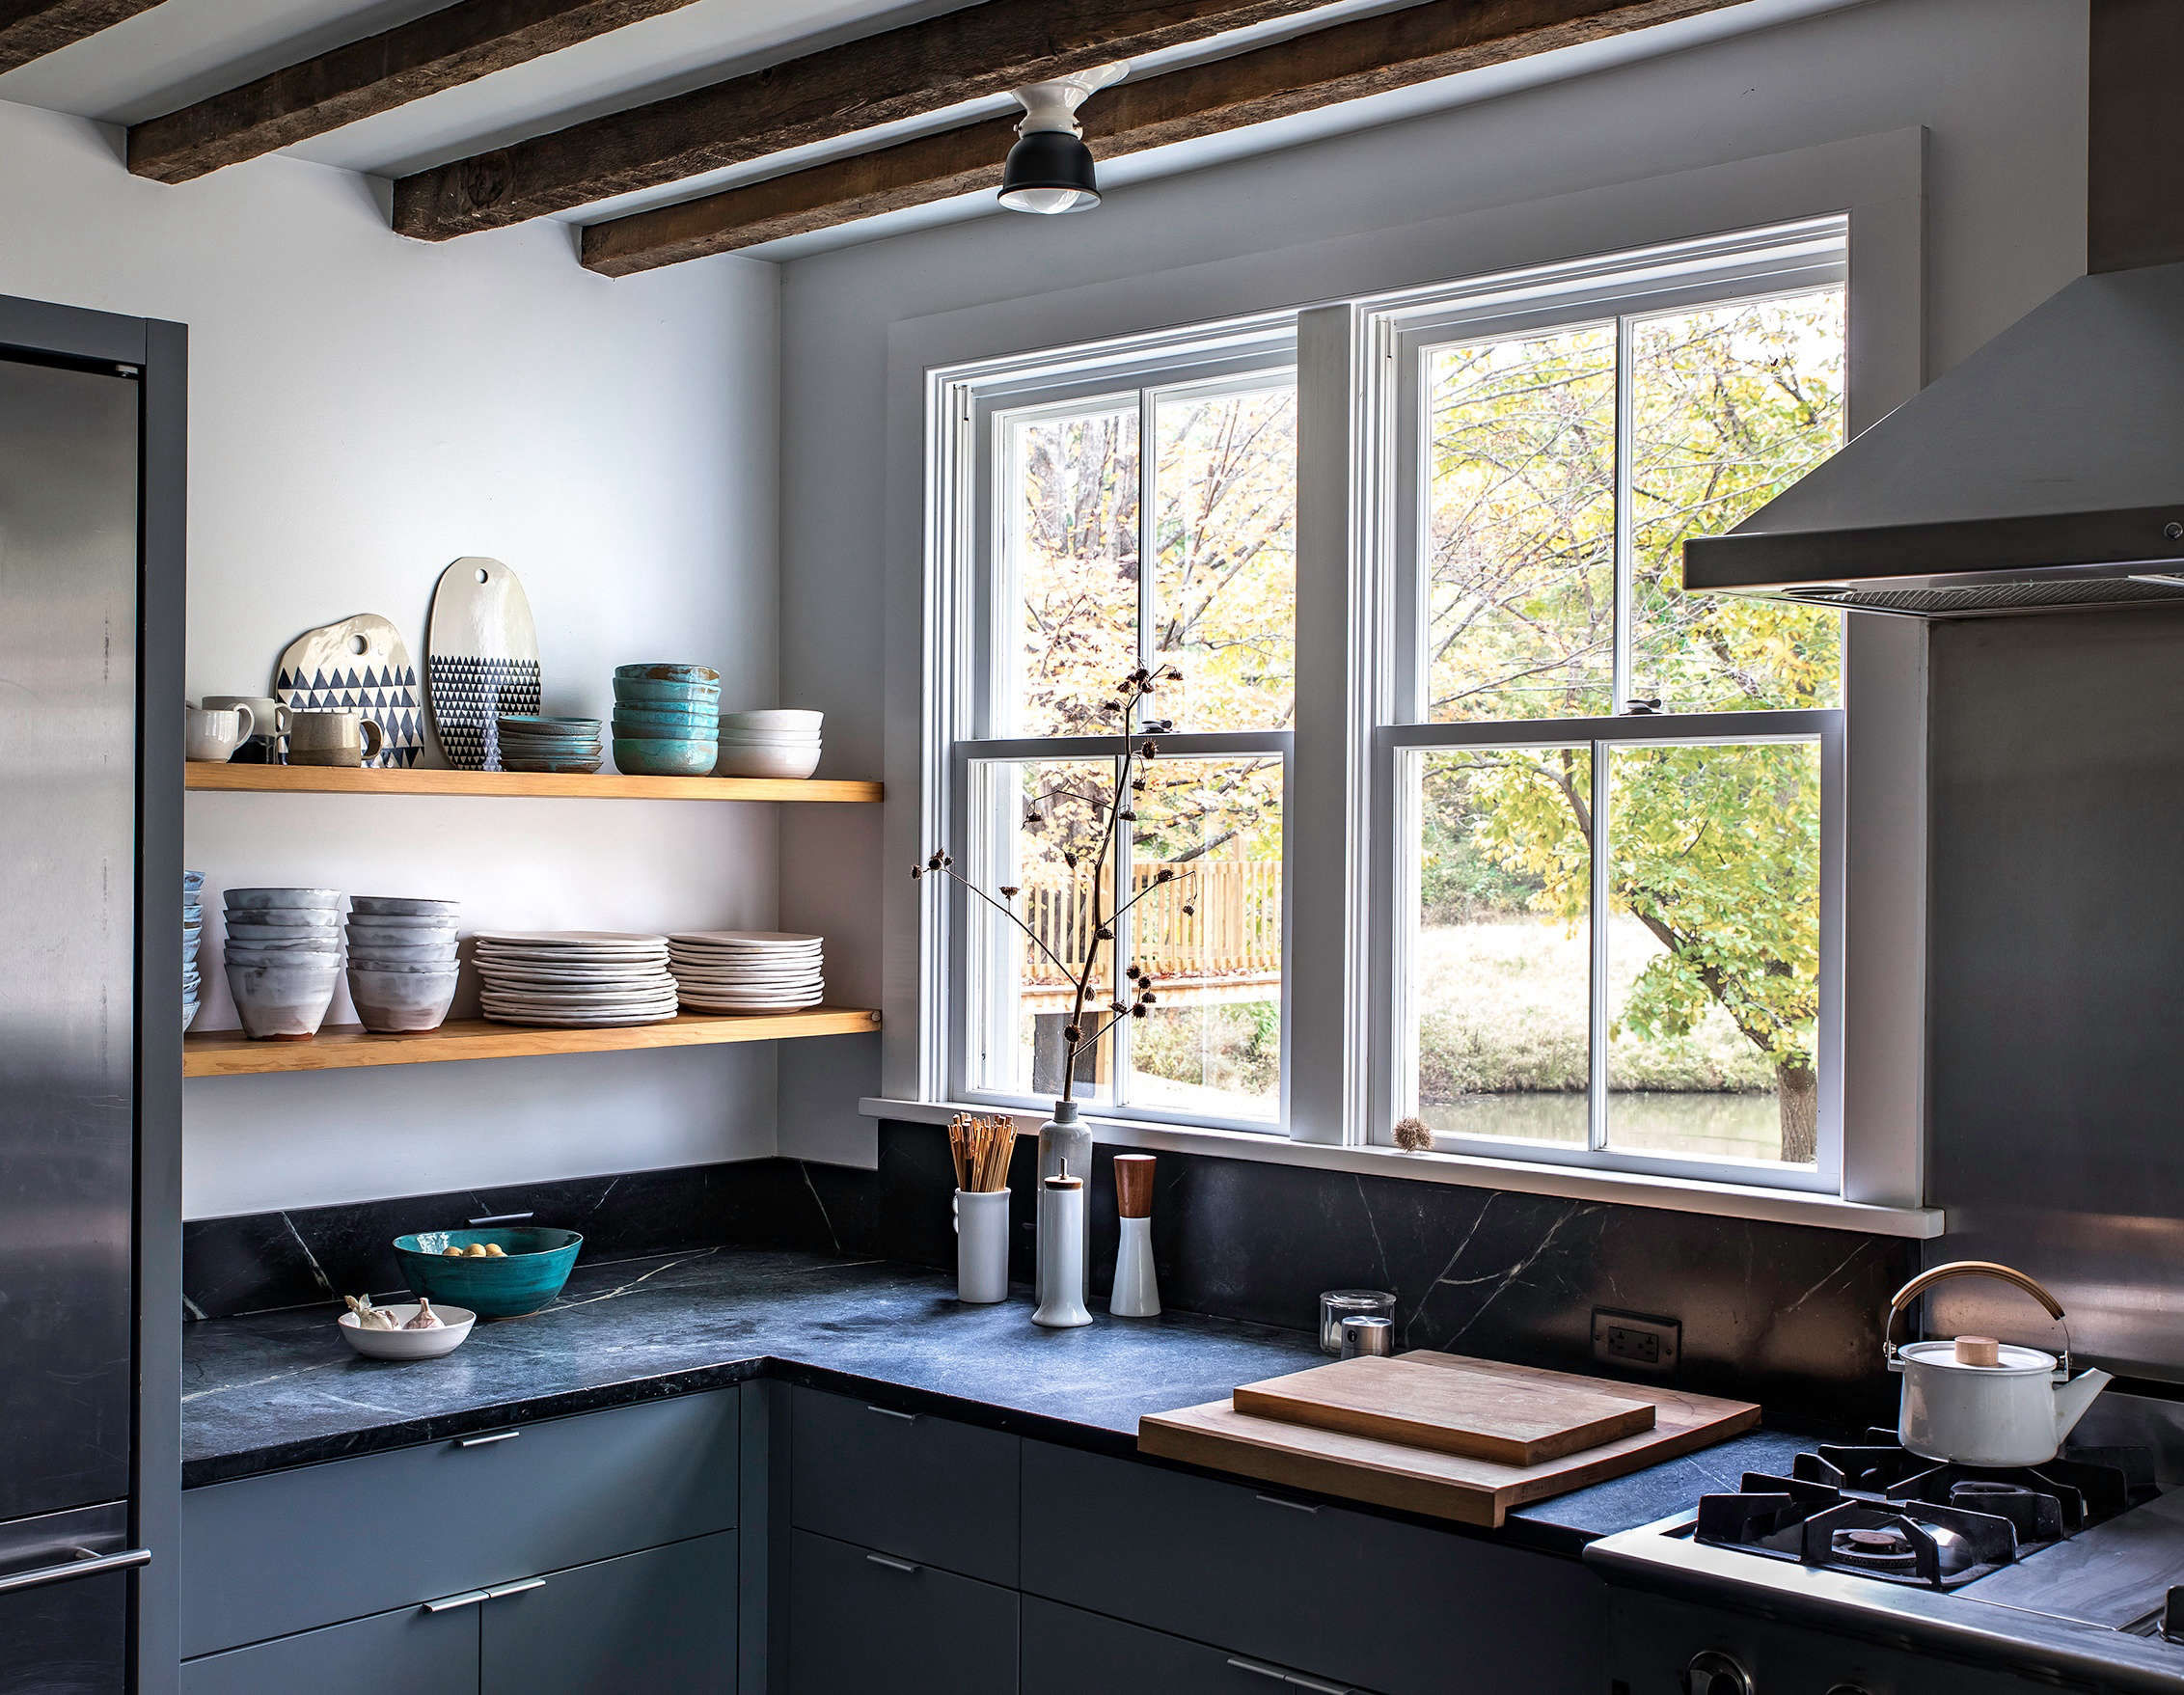 Should You Install Soapstone Countertops? The Pros and Cons